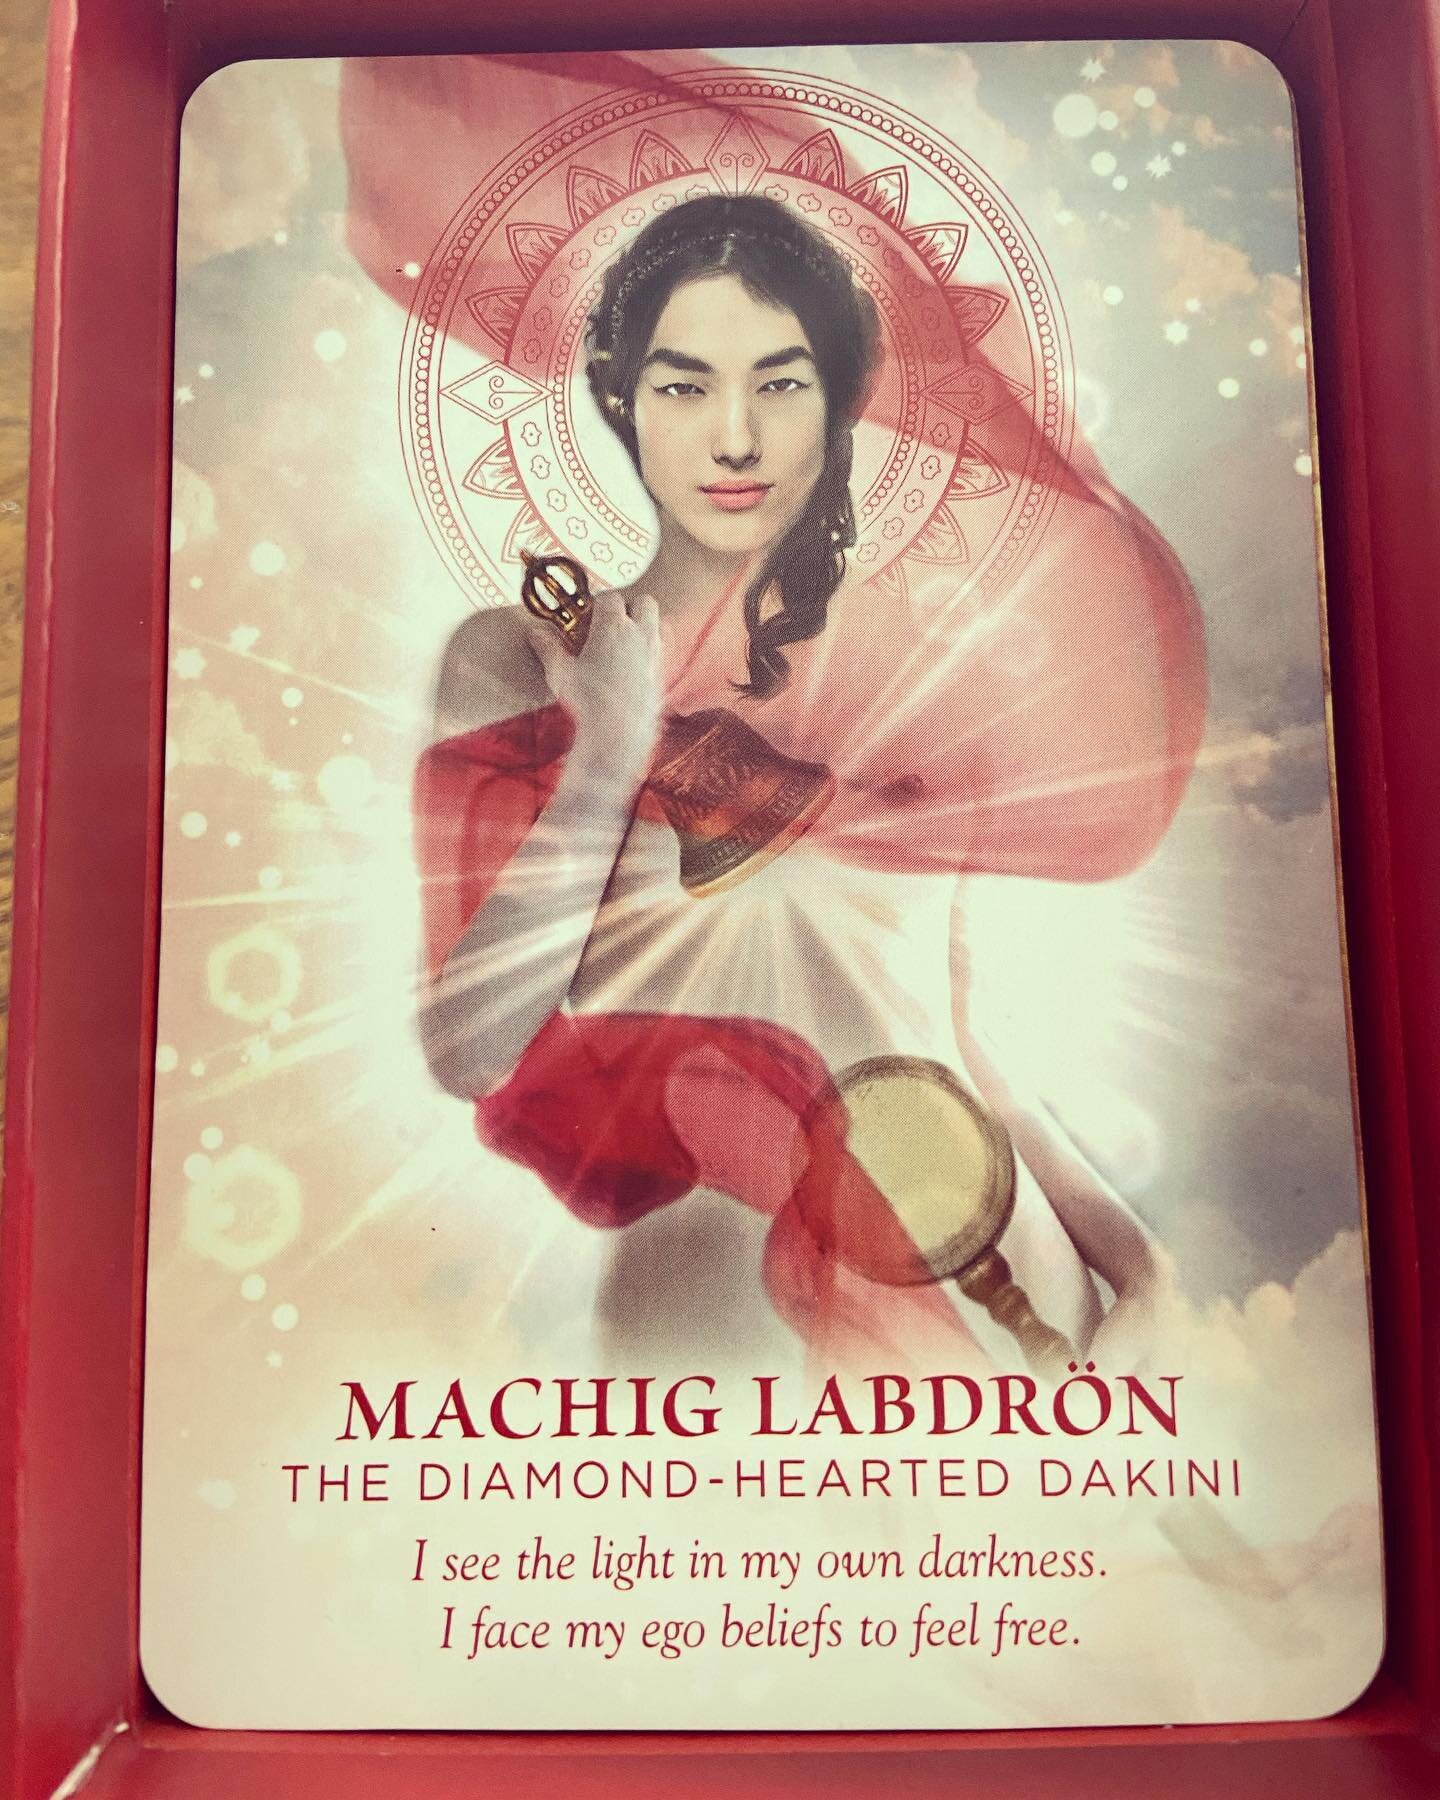 My soul has chosen this card today. There may be a message for you in this one as well 💕

Machig Labdron is an incarnation of Yeshe Tsogyal who has been coming through to work with me the last few months. Both are incarnations of Vajrayogini, the fe